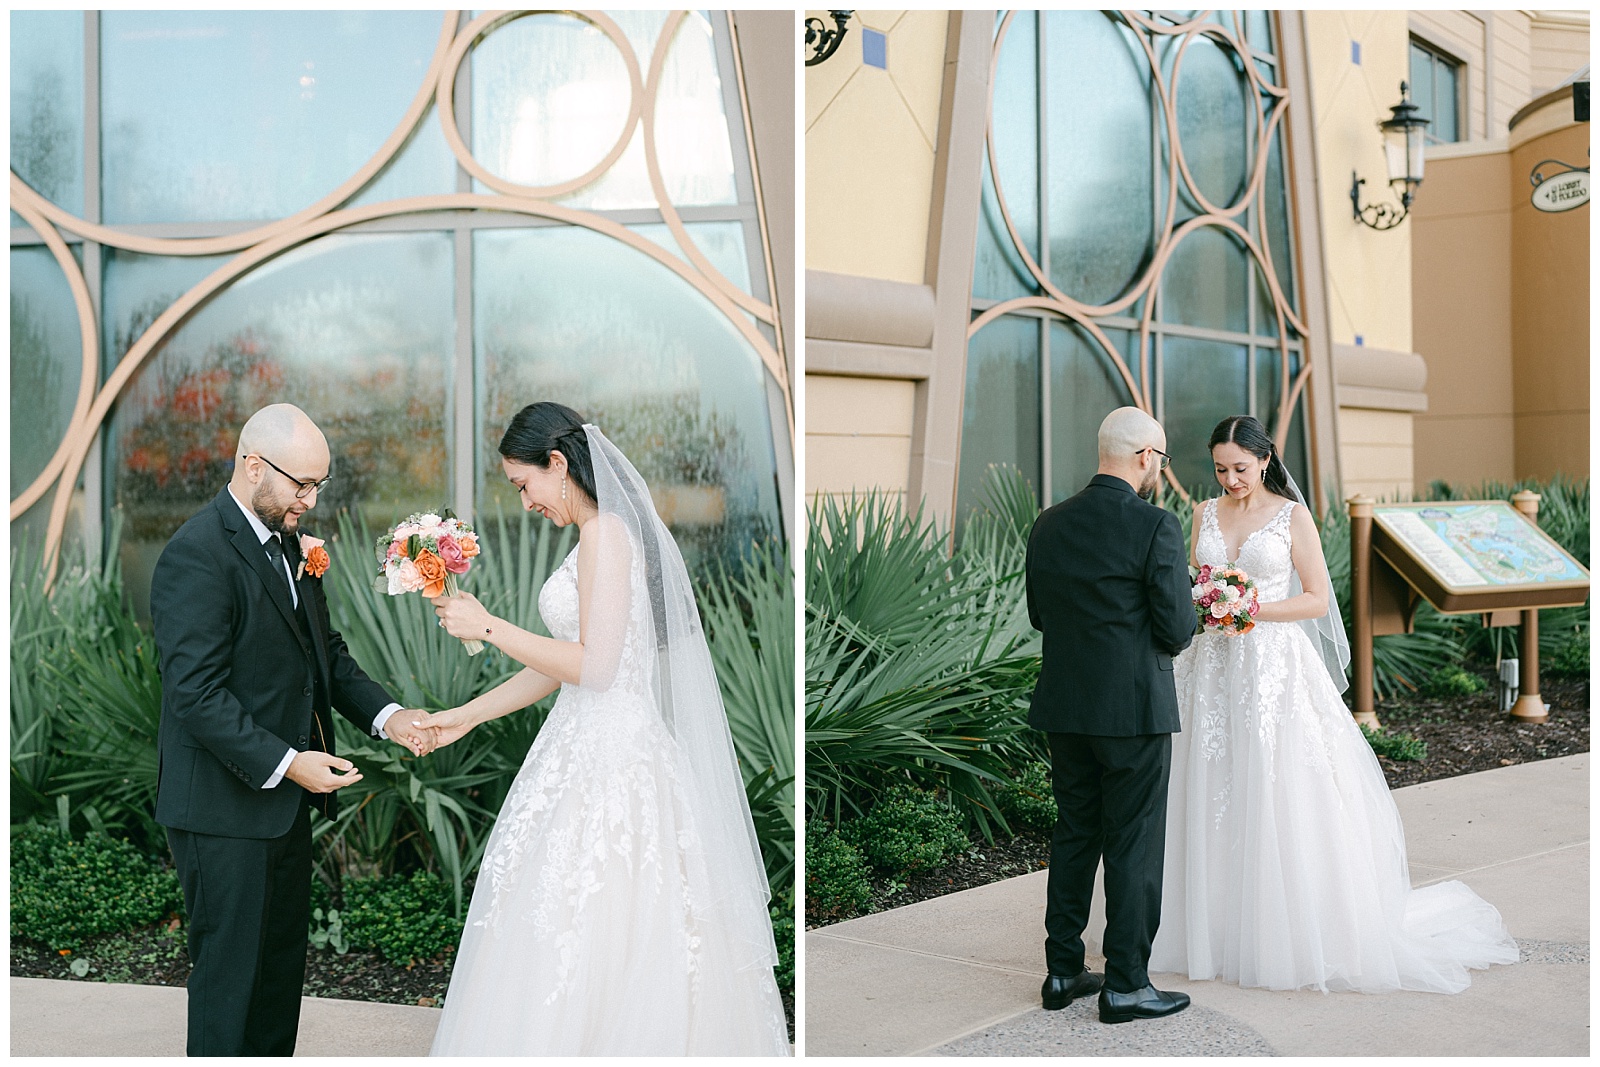 Left: Groom looking at all of the details on the brides dress.
Right: Bride looking at all the details on the groom.
By Elizabeth Kane Photography at Disney's Riviera Resort in Orlando Florida